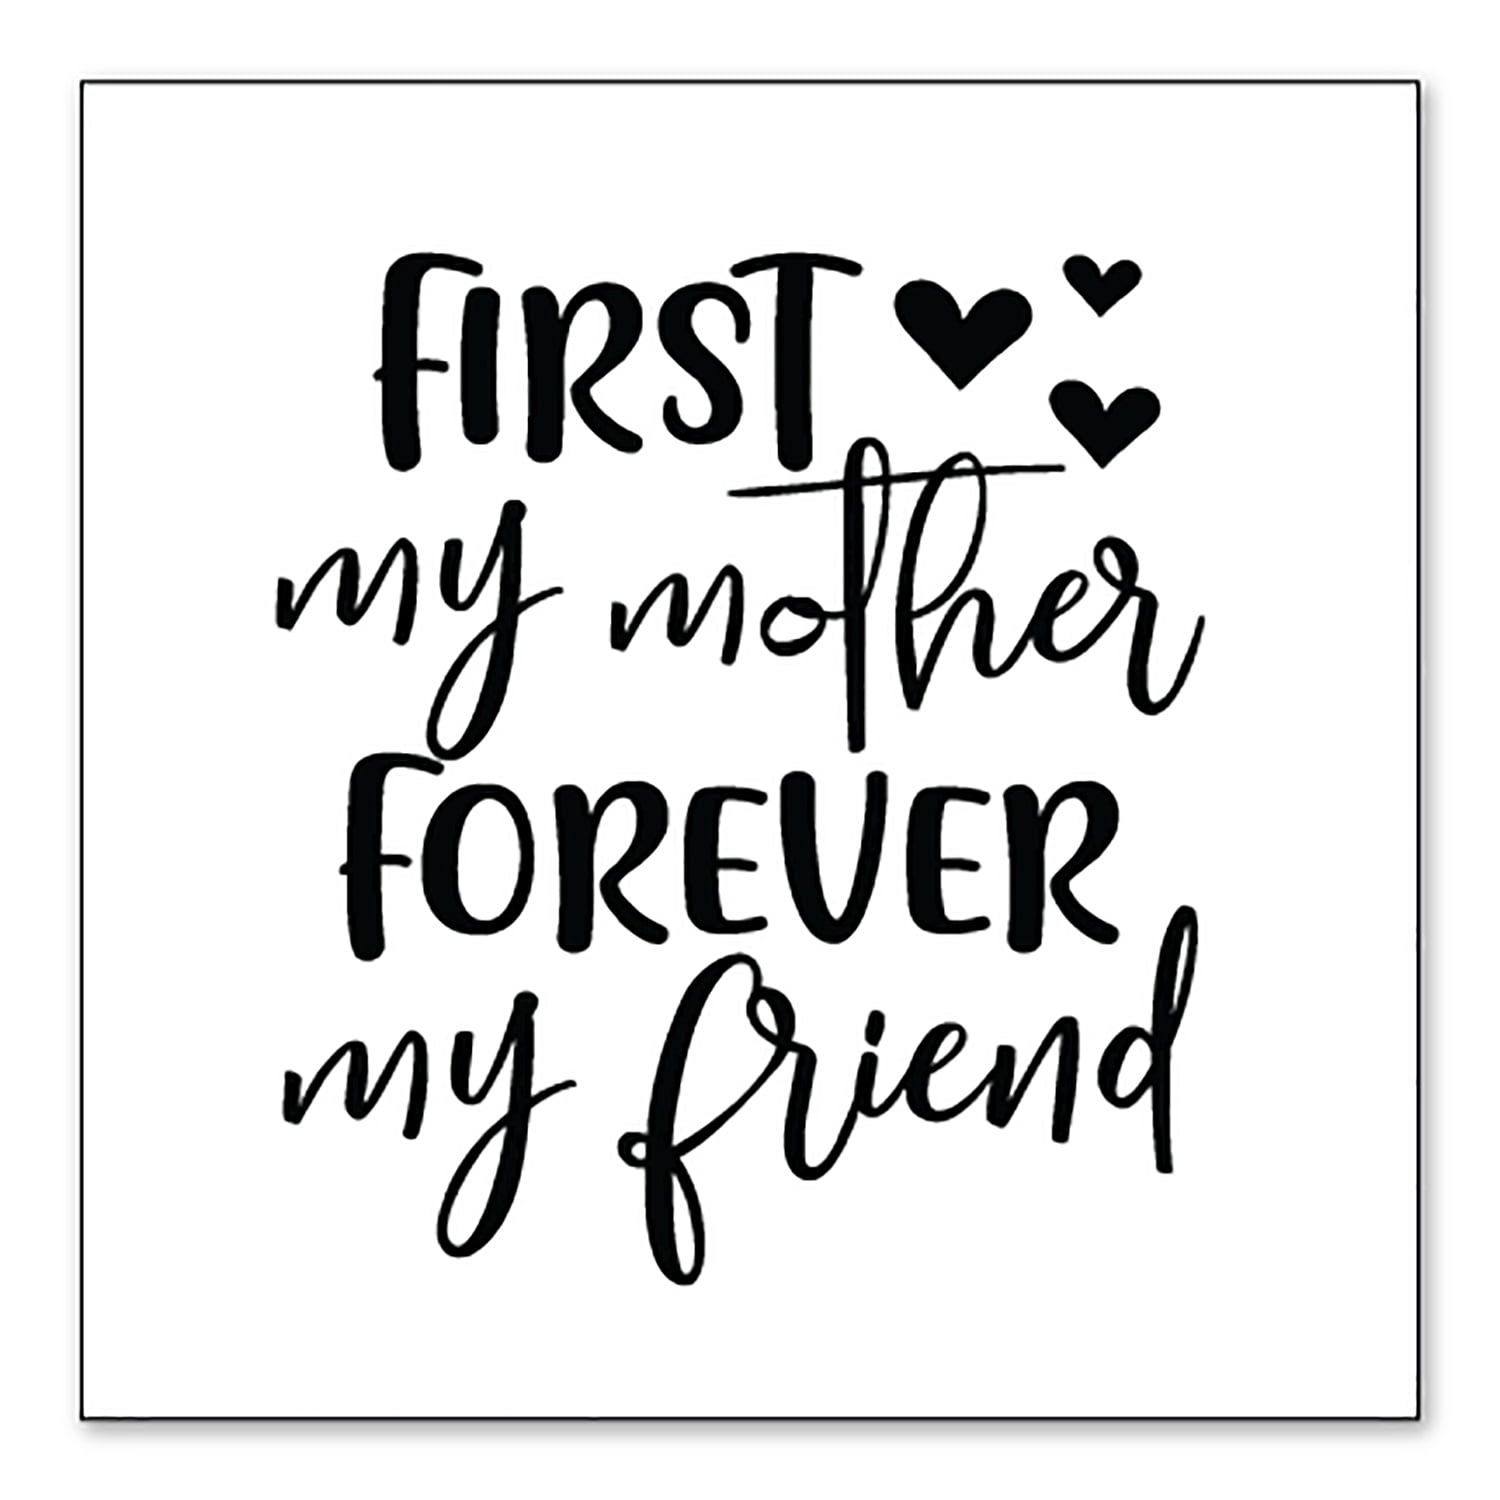 Forever Young car bumper sticker decal 5" x 4" 